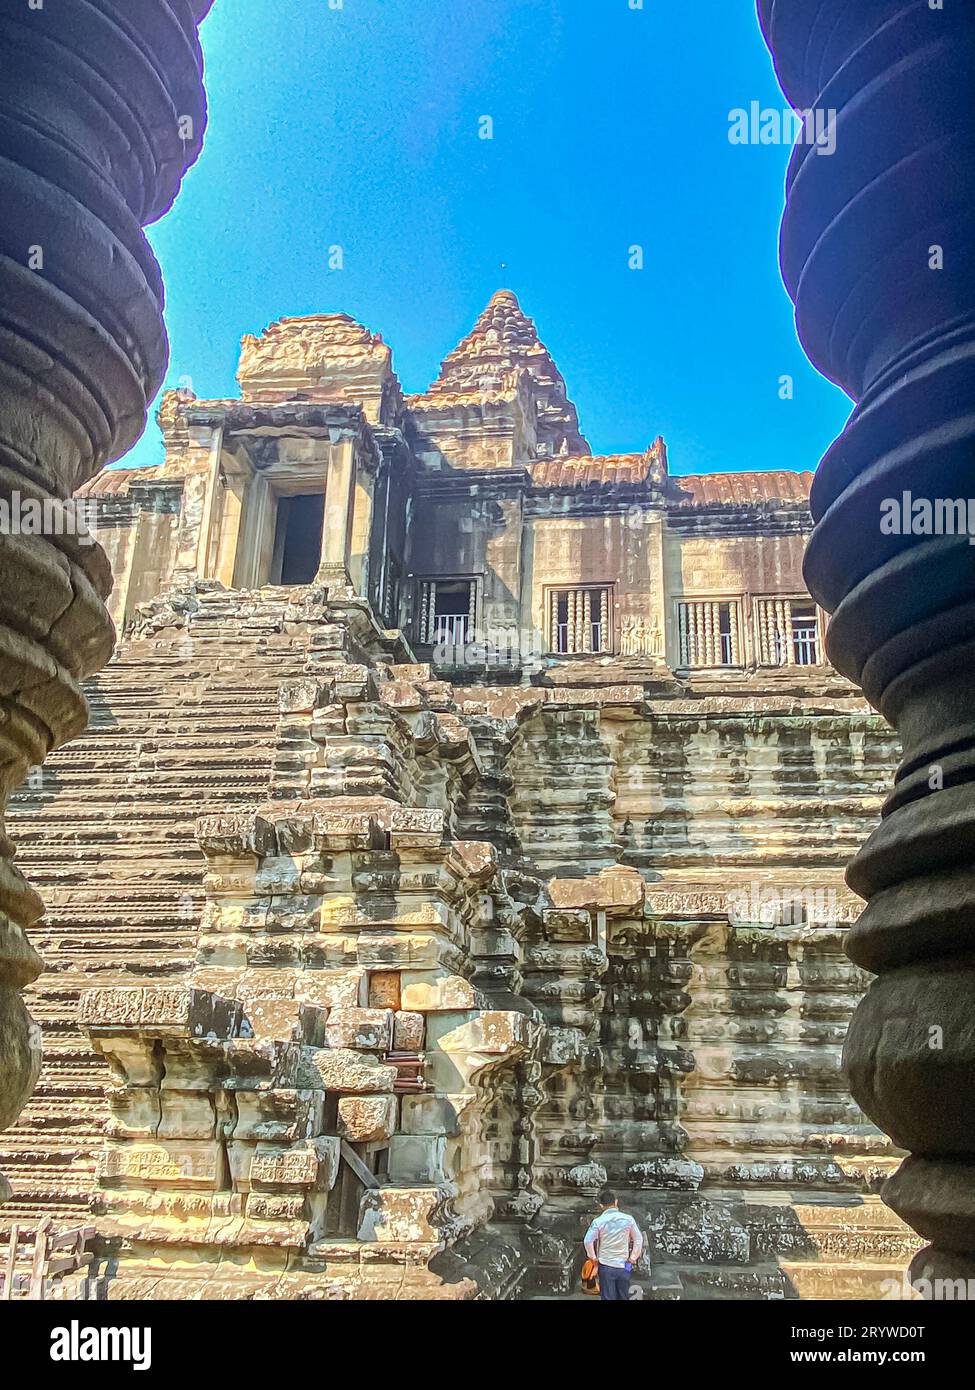 Angkor Wat, a temple complex in honor of the god Vishnu, built in the Angkor region, Siem Reap province in northern Cambodia. Stock Photo